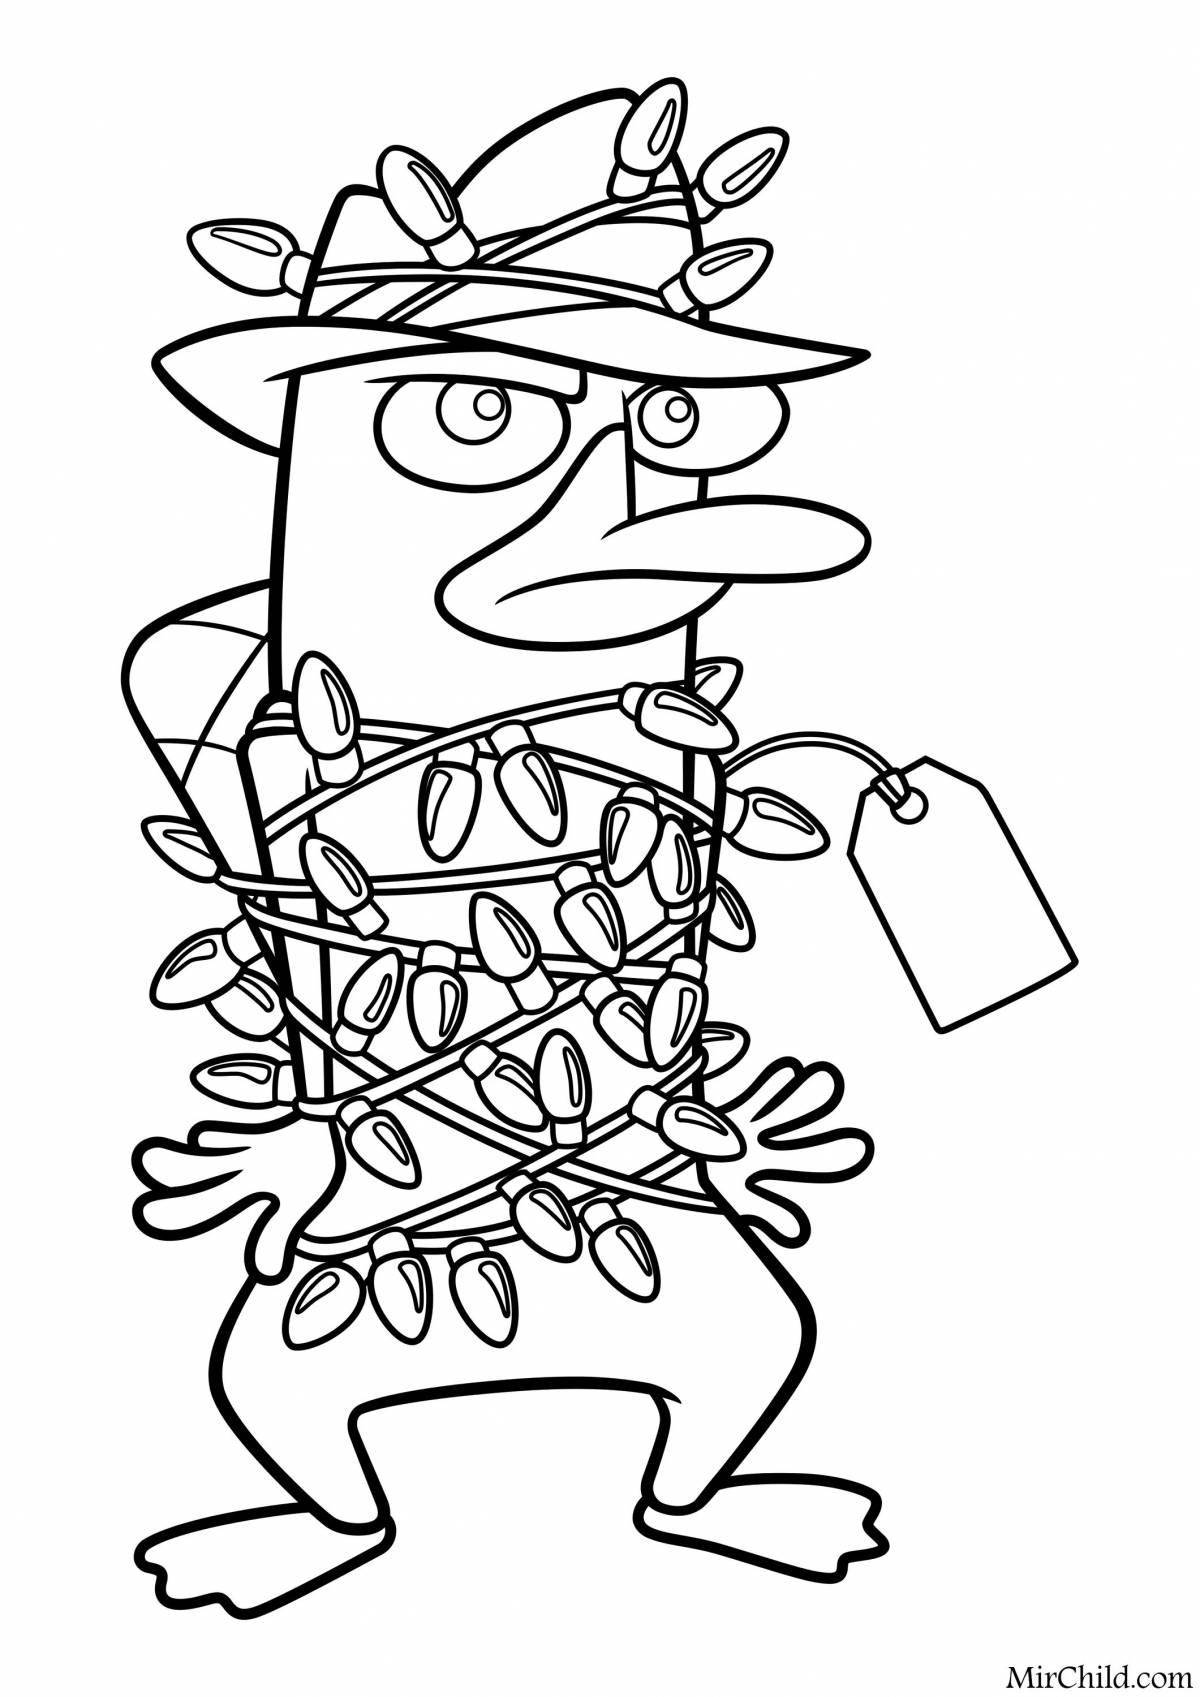 Coloring page exquisite platypus perry